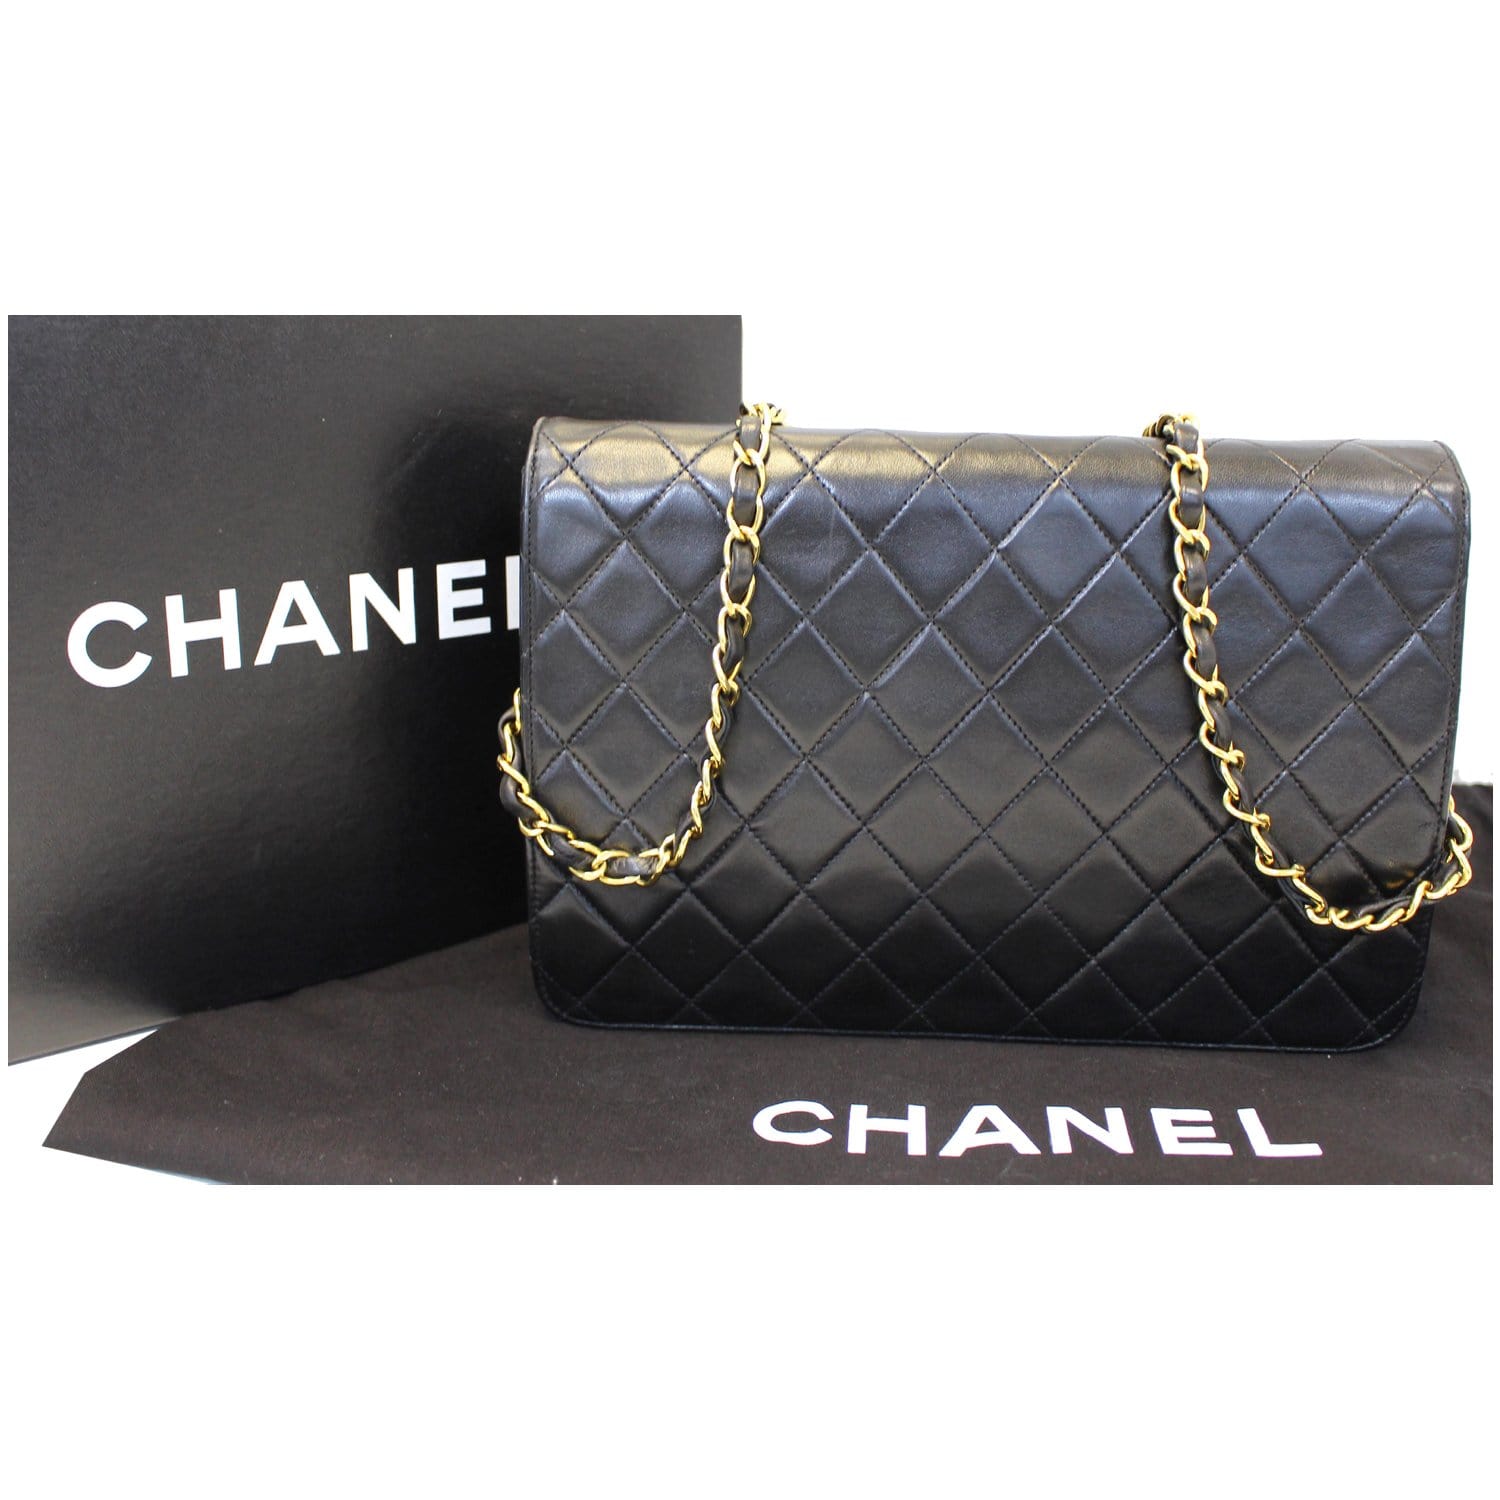 Handbags Chanel Chanel Full Flap Chain Shoulder Bag Clutch Black Quilted Lambskin